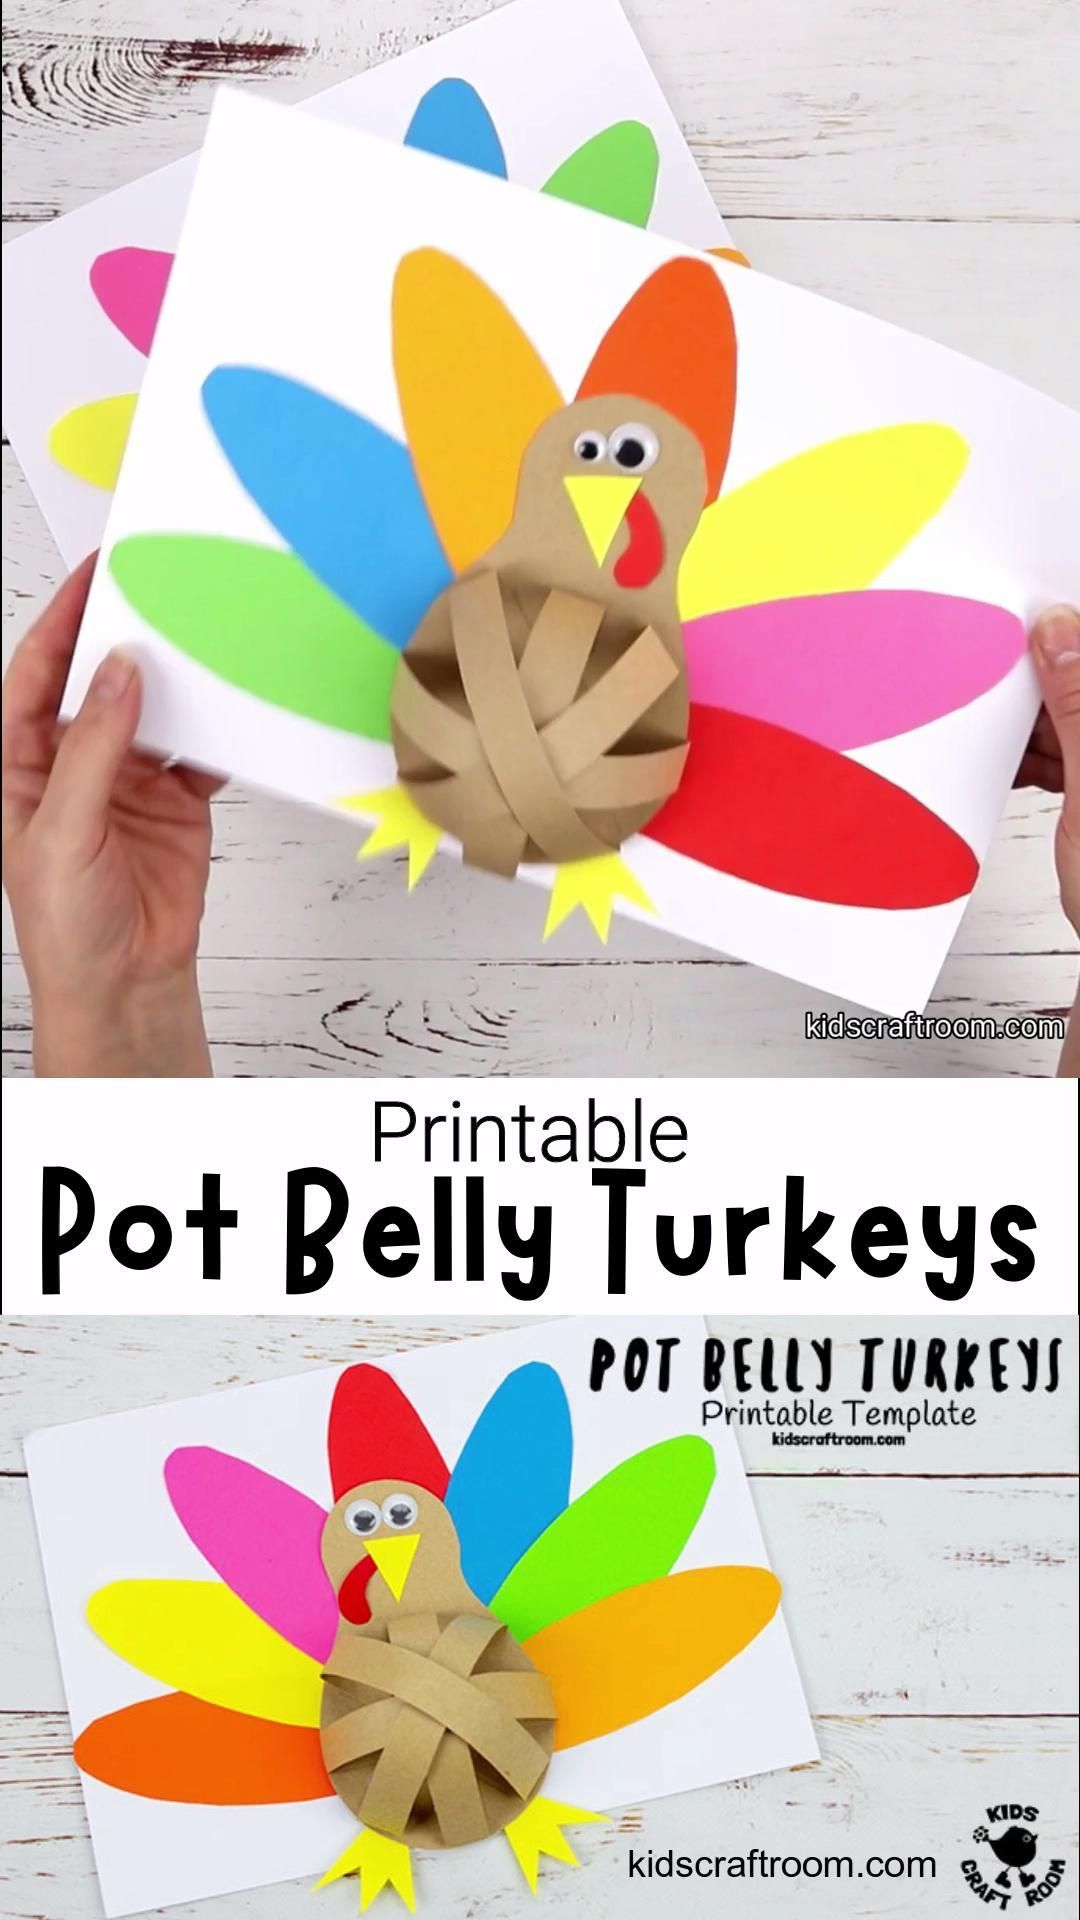 Pot Belly Turkey Craft - Pot Belly Turkey Craft -   17 diy thanksgiving crafts for toddlers ideas